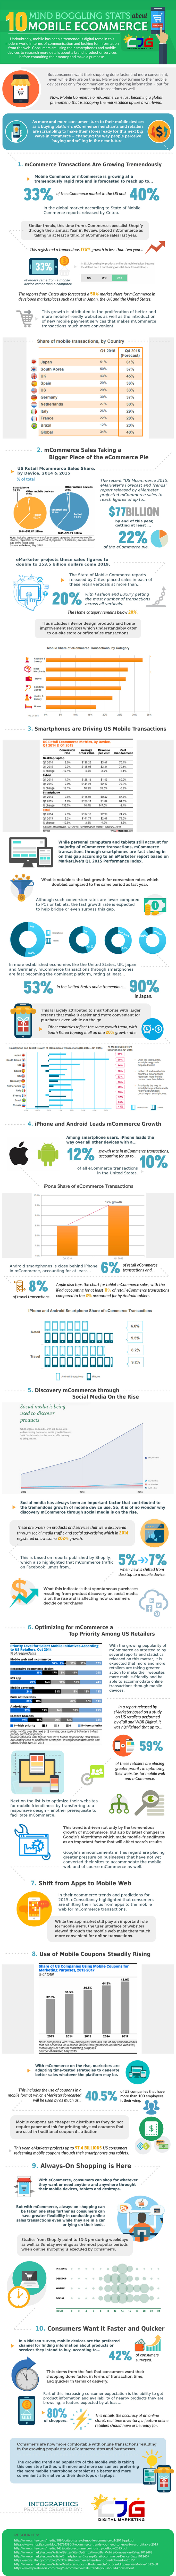 10 Mind Boggling Stats about Mobile Ecommerce (Infographic) - An Infographic from CJG Digital Marketing